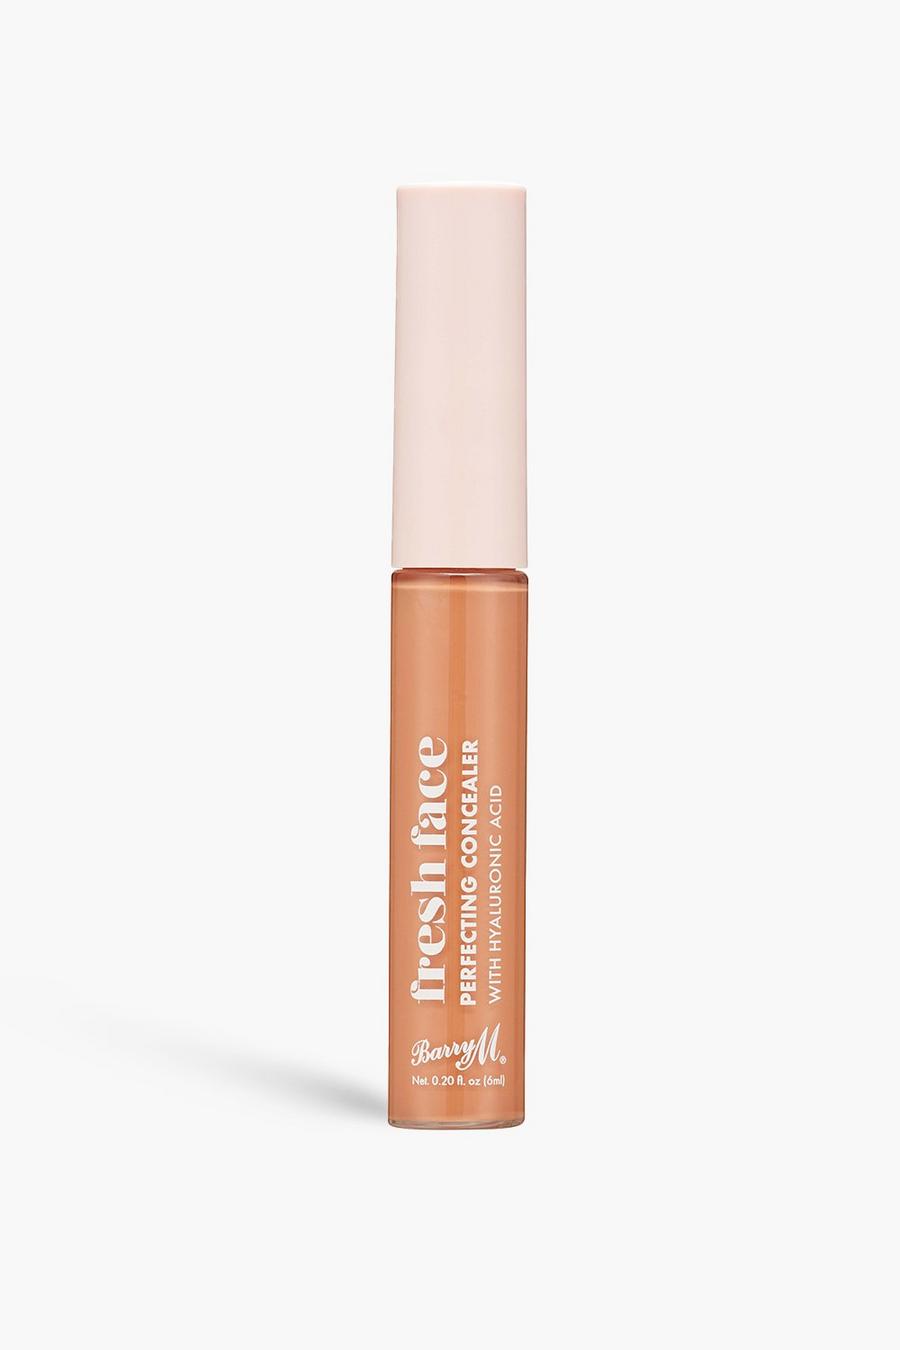 Tan marrón Barry M Fresh Face Perfecting Concealer 8